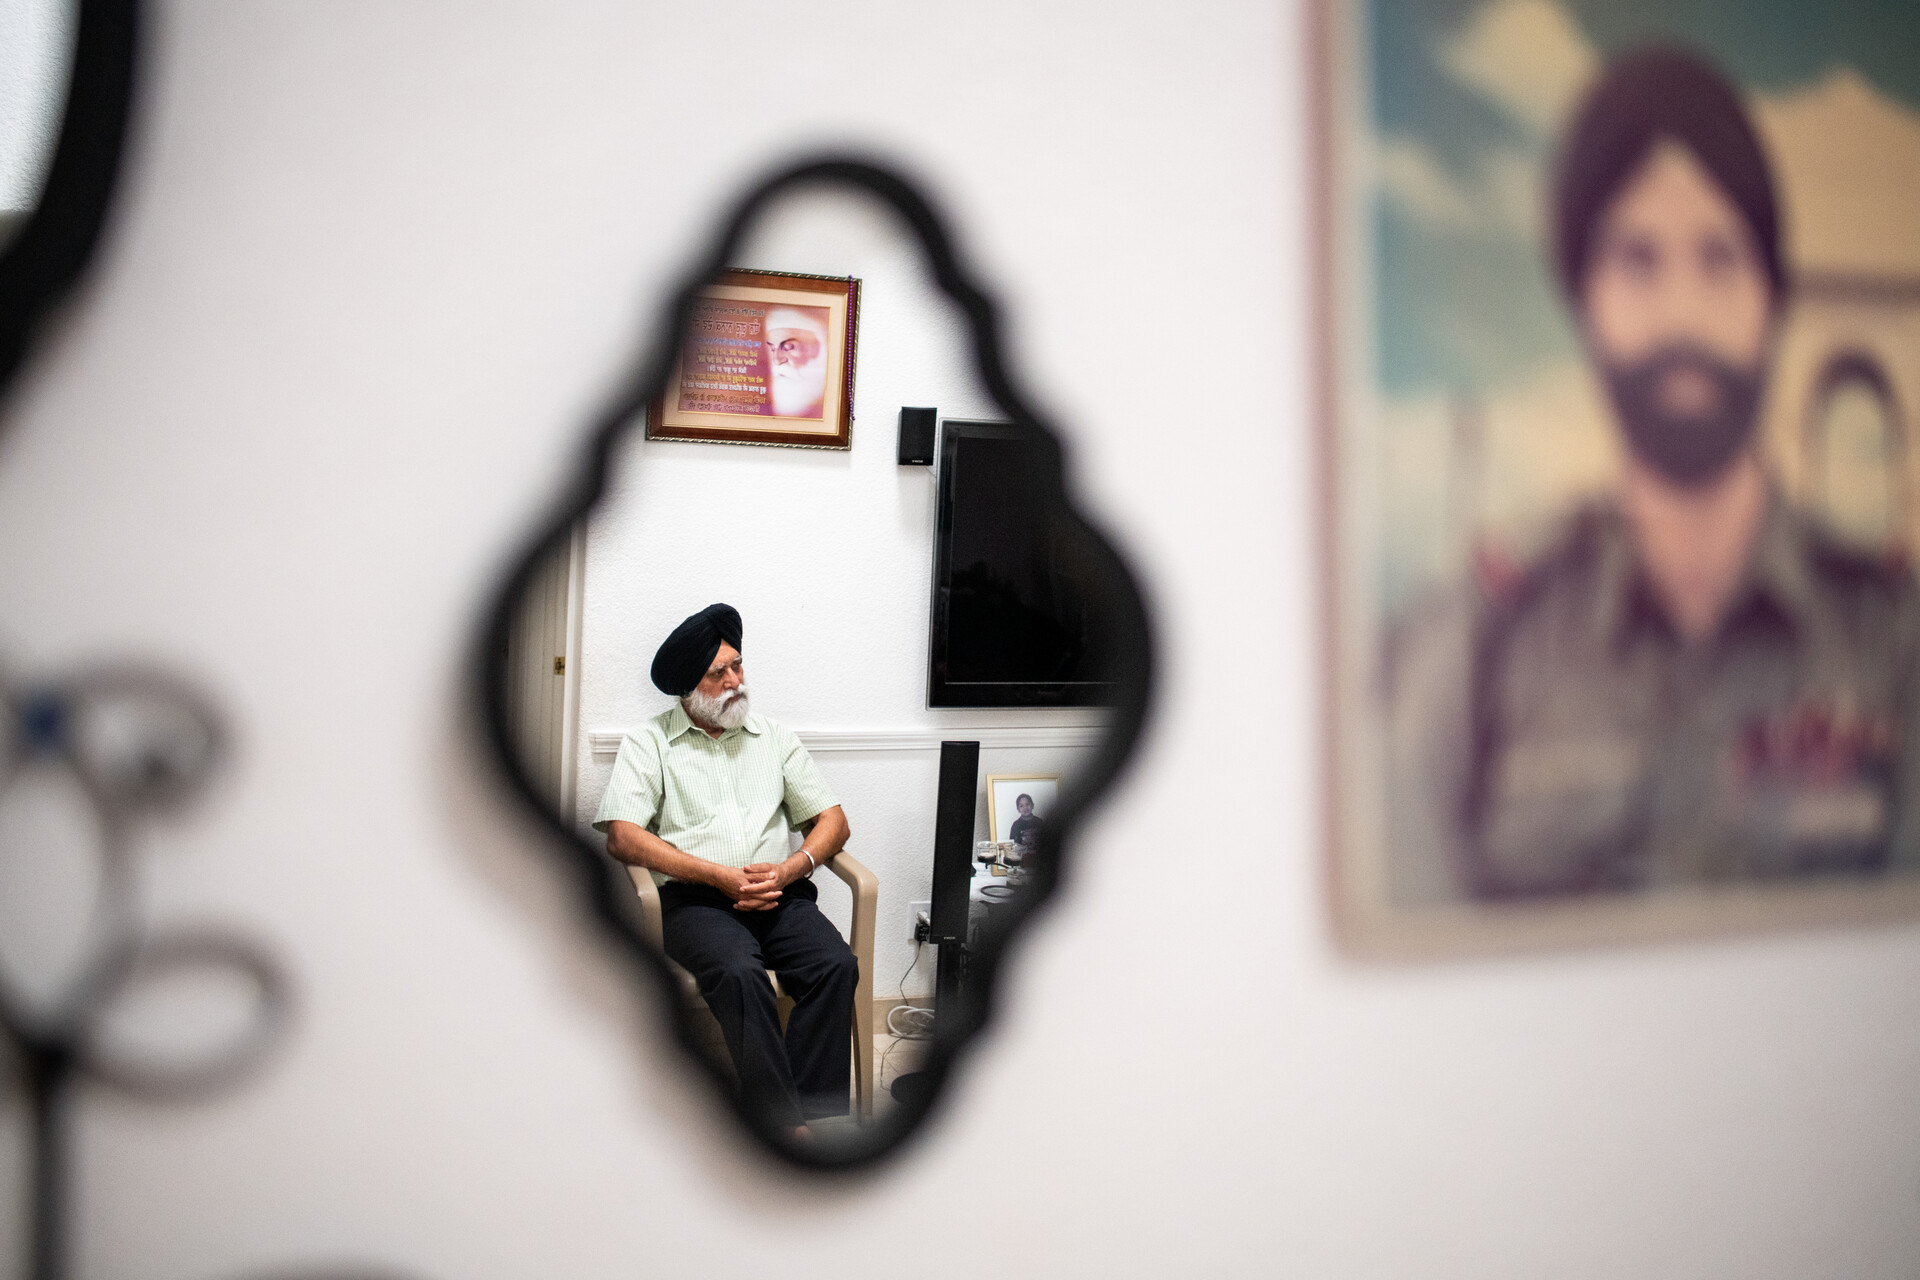 Mr. Singh is reflected in a mirror on a wall; the wall a poster with an image of a bearded man with a turban are in soft focus.